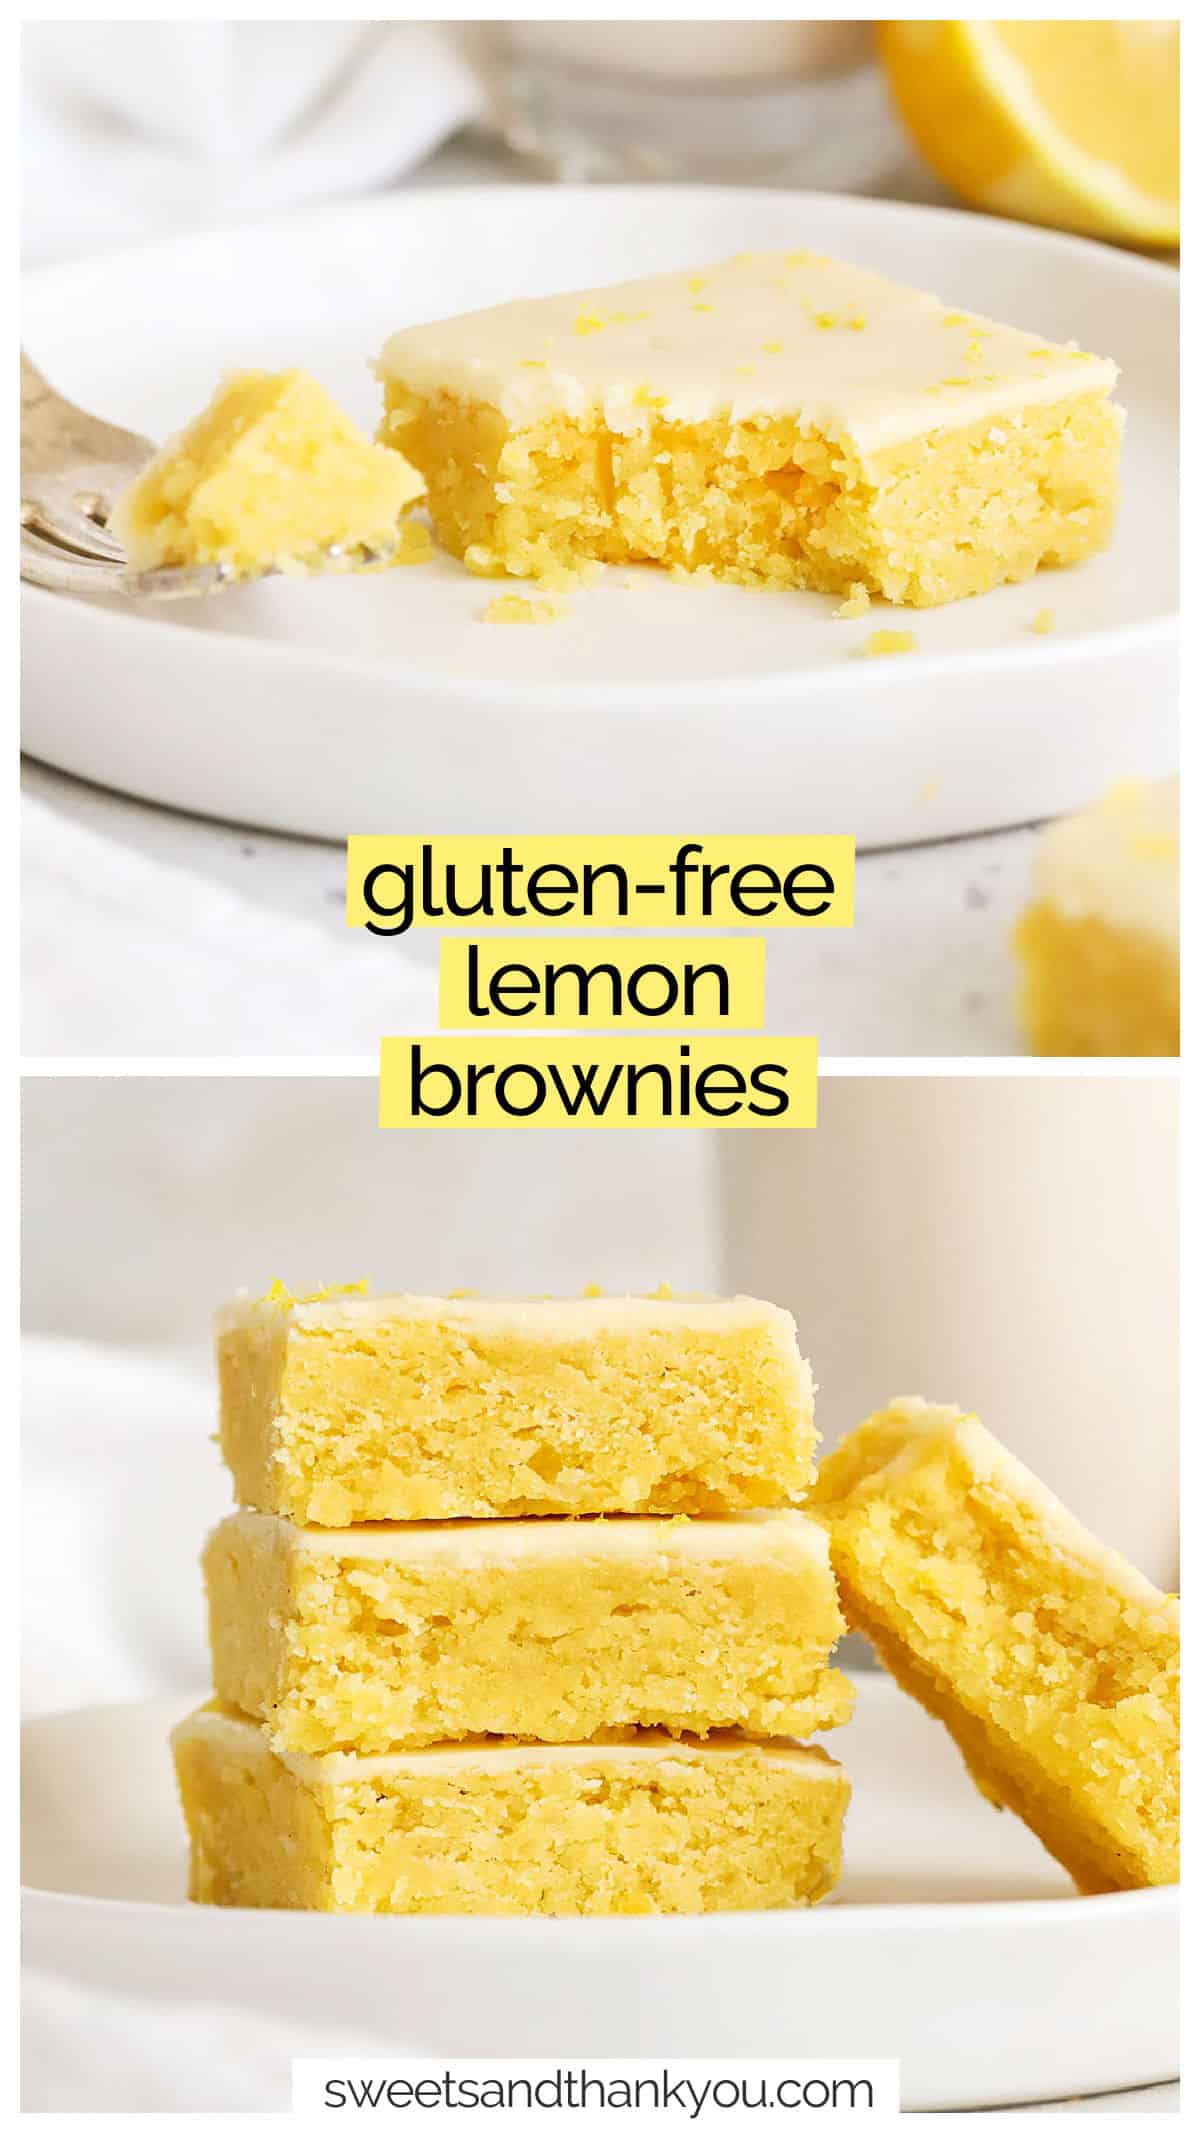 This Gluten-Free Lemon Brownies recipe in unlike any other brownie recipe you've tried! These fudgy lemon brownies are full of zesty citrus flavor--like taking a bite out of sunshine! They're a perfect Easter dessert or spring treat! 